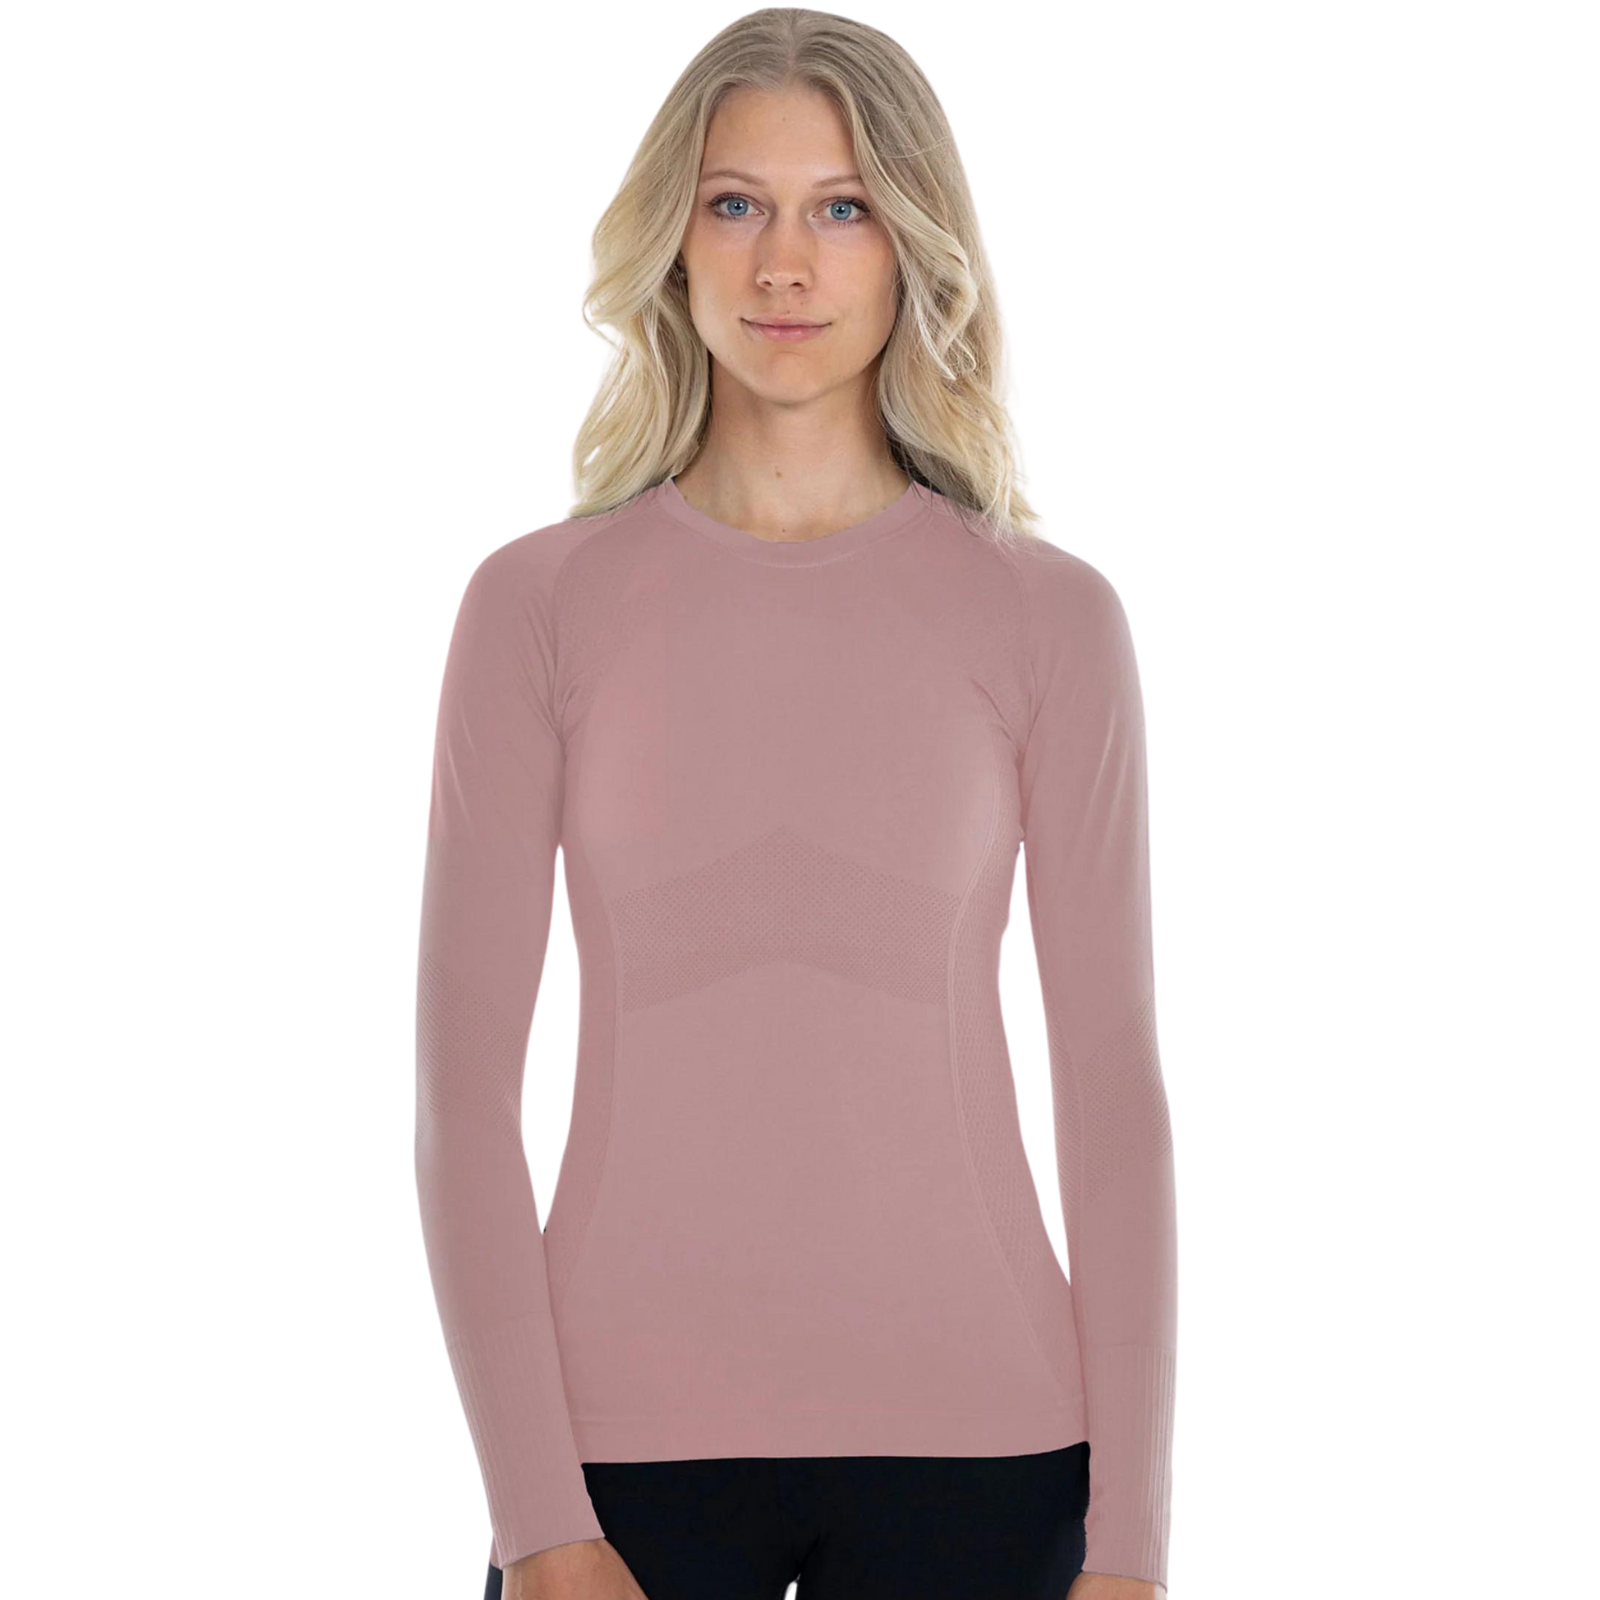 Anique Long Sleeve Crew Shirt in Spiced Chai - Women&#39;s XS (0-2)